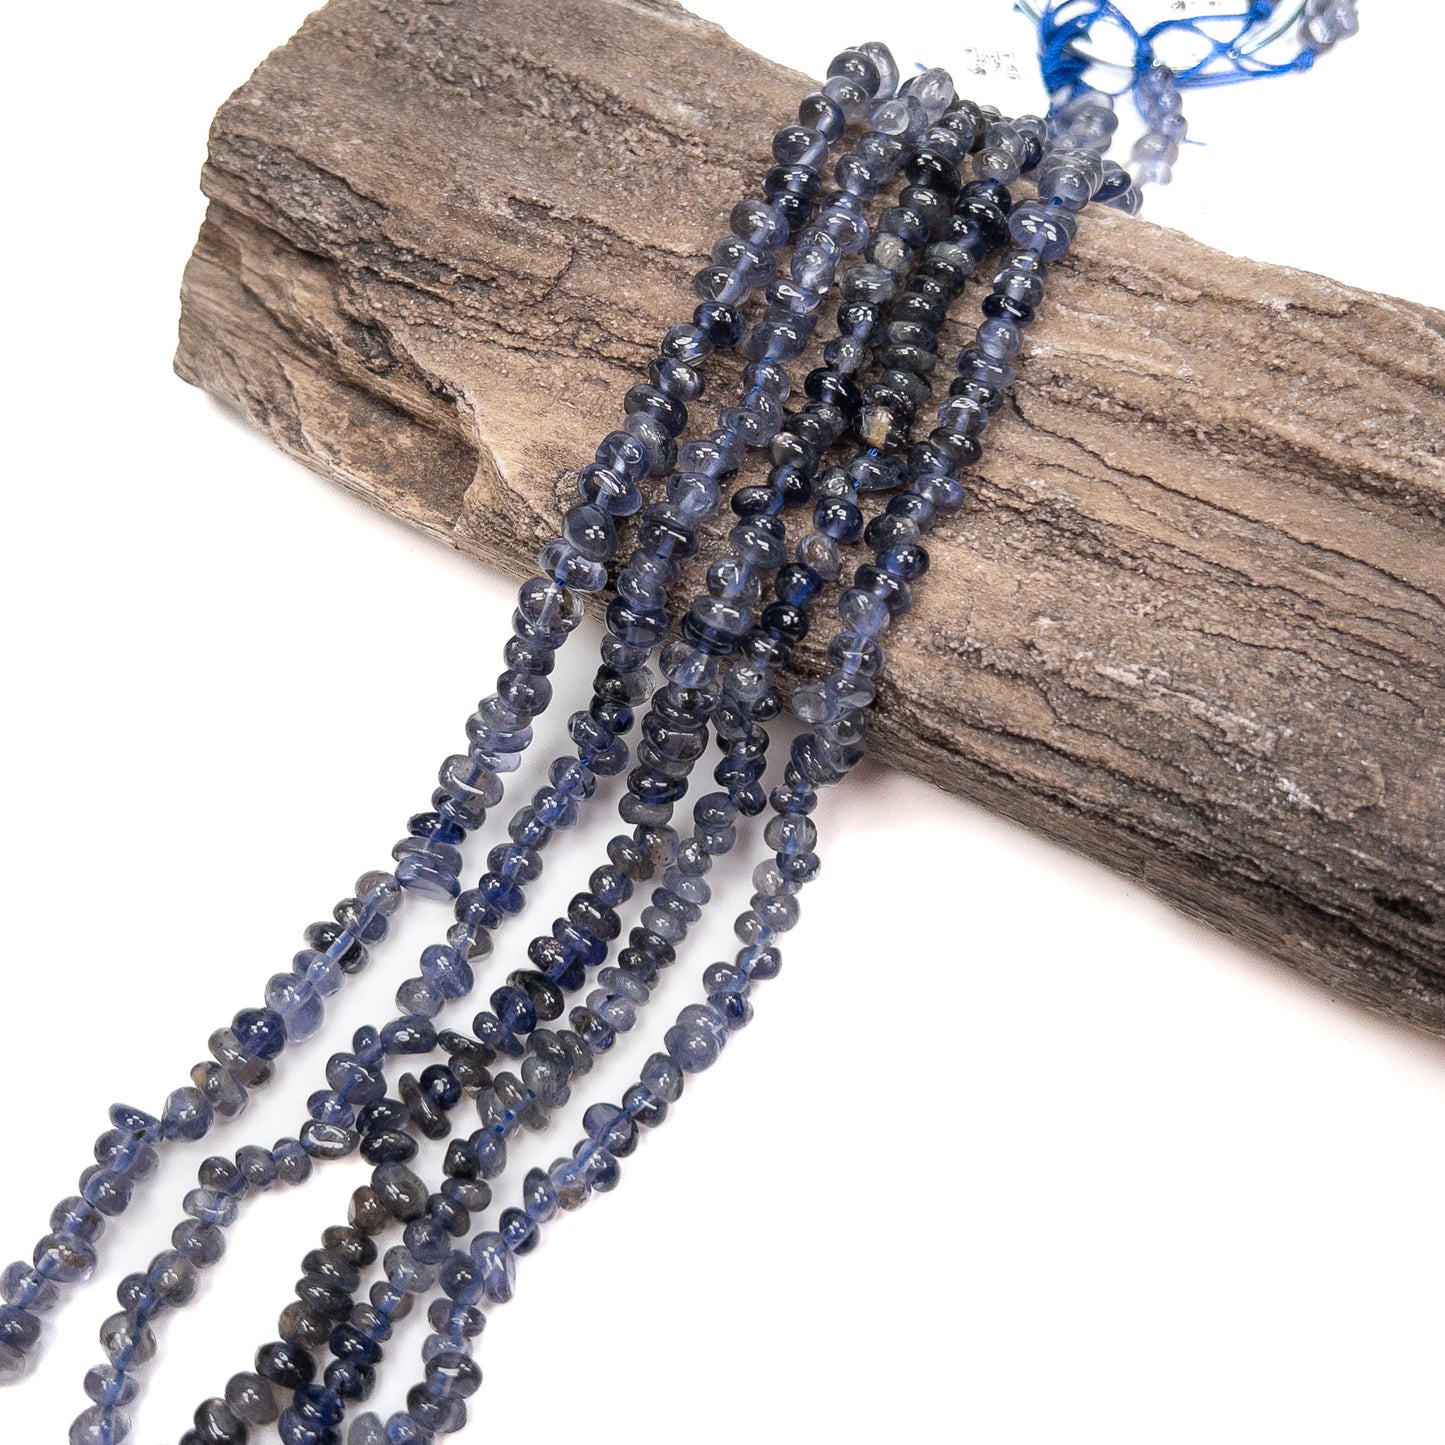 Iolite Small Smooth Tumbled Pudgy Chip Bead - 7.75" Strand